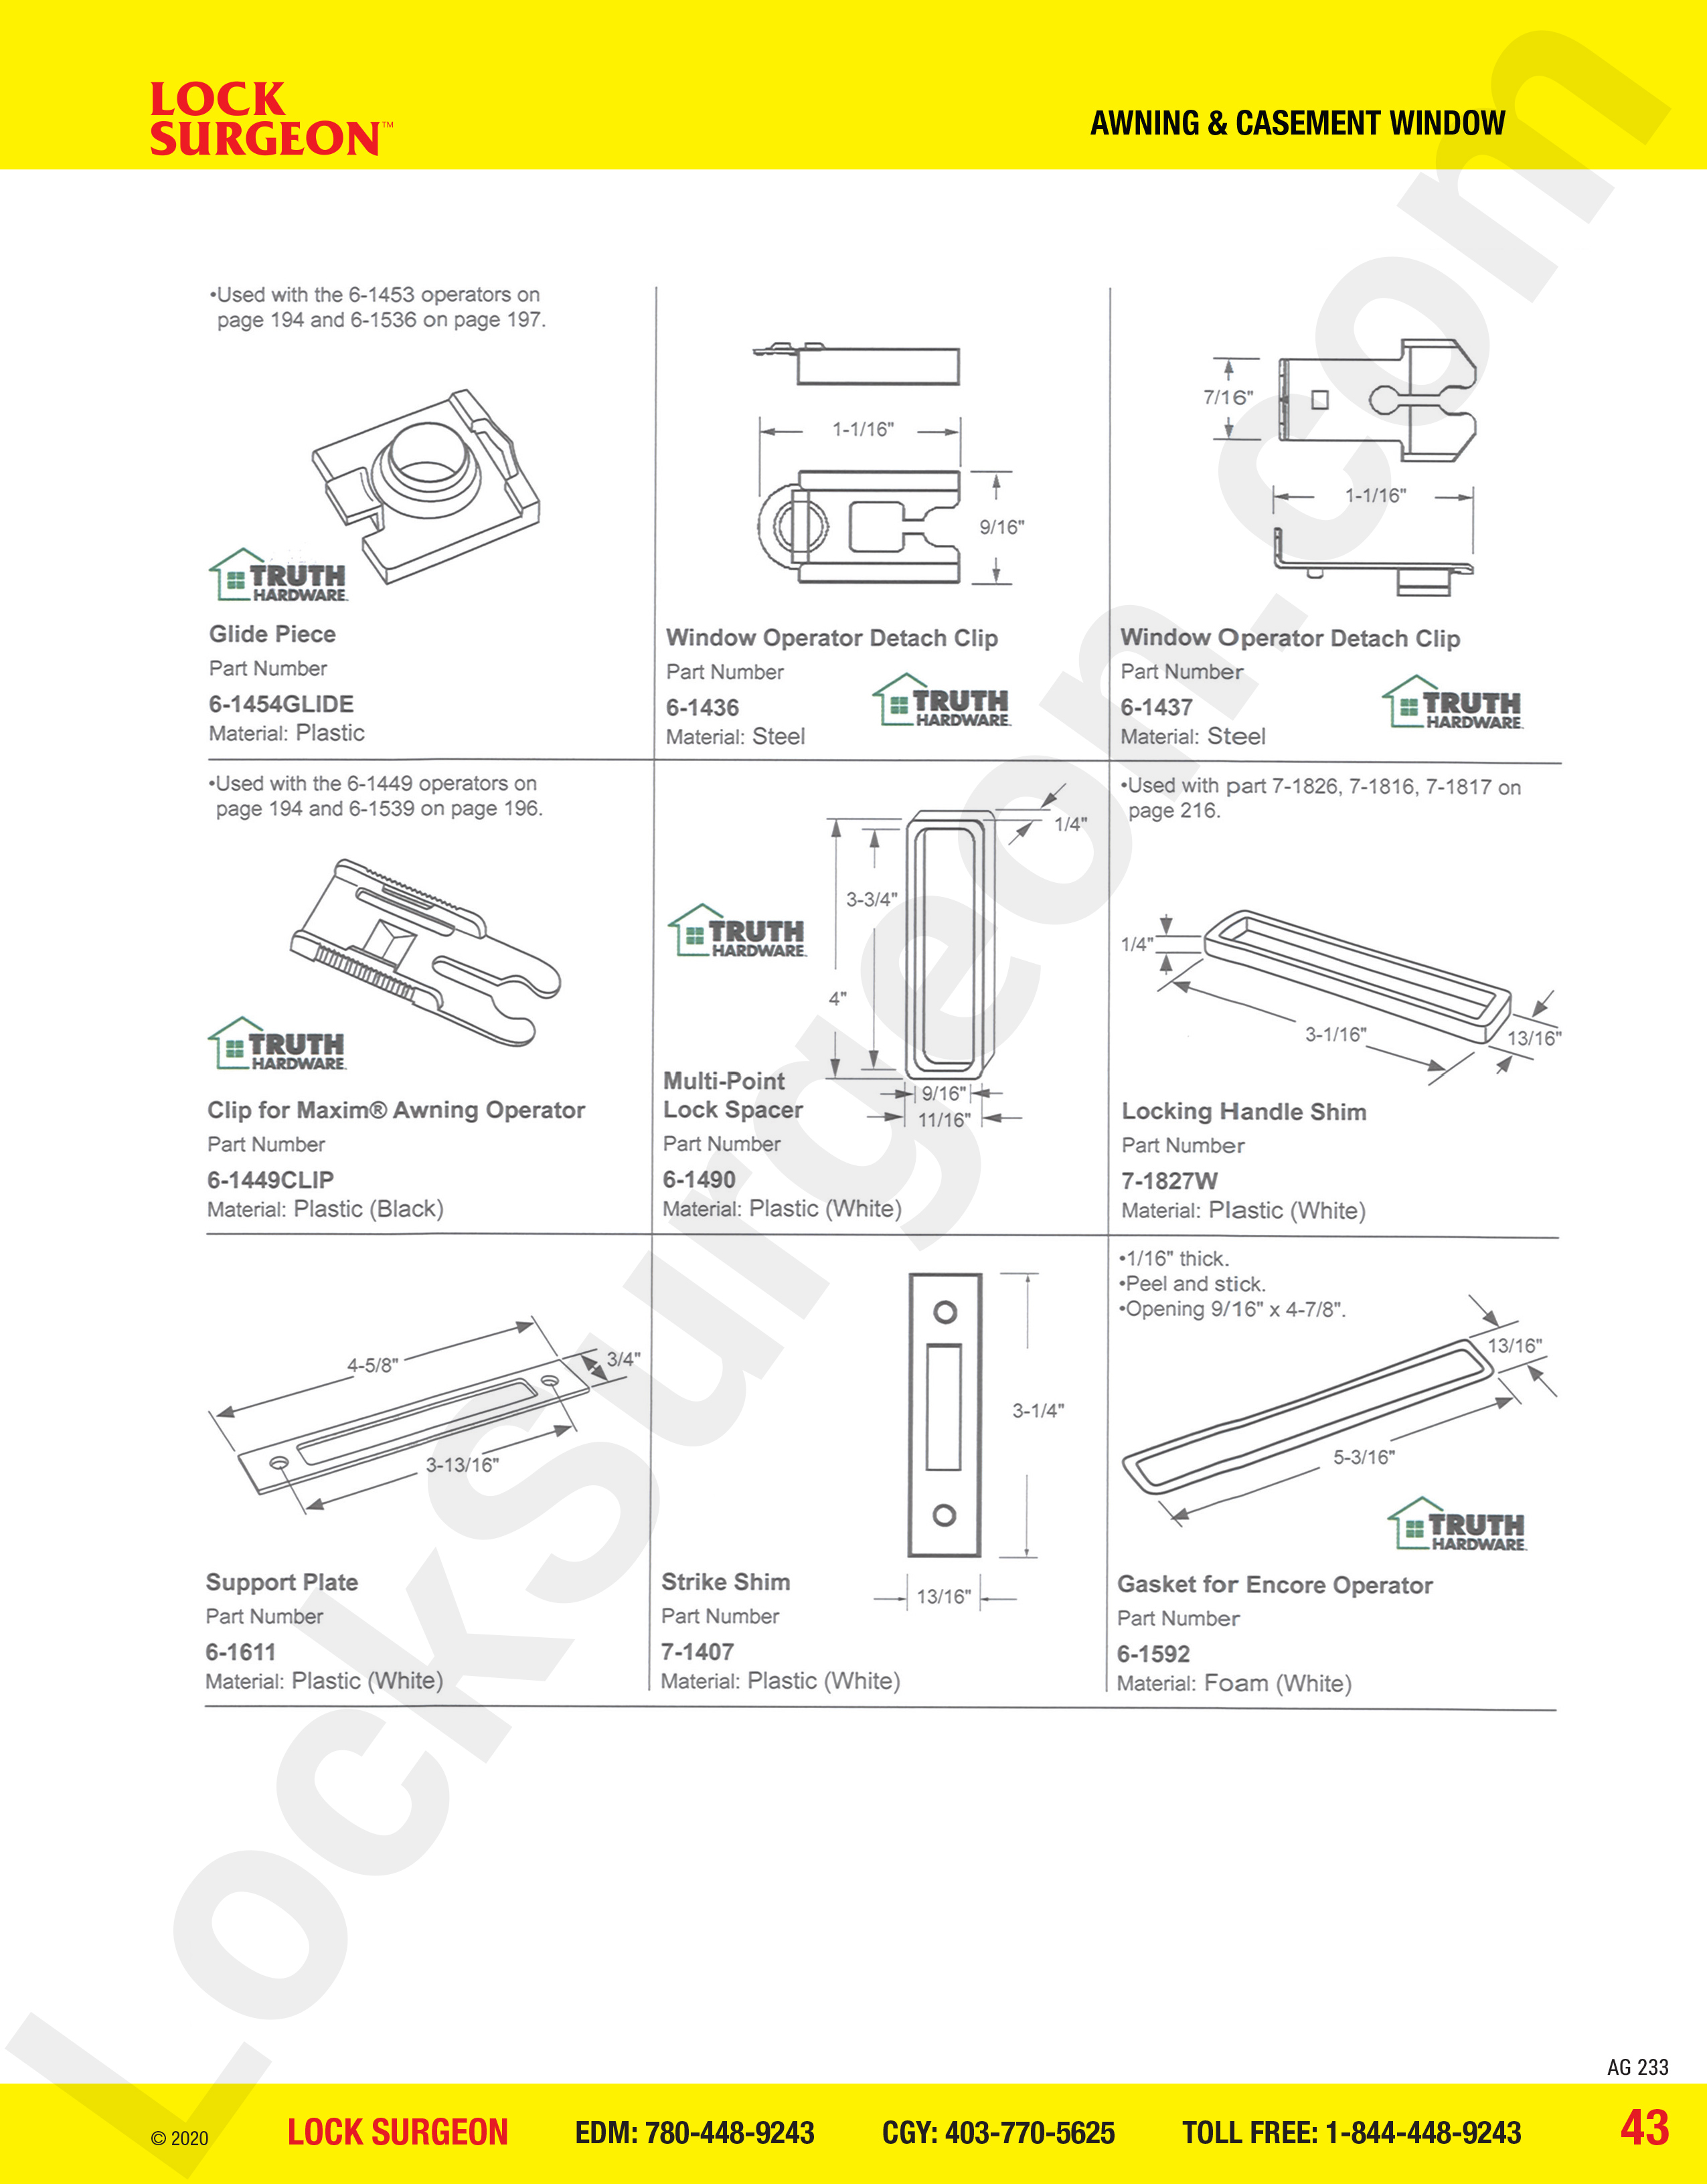 awning and casement window parts for clips, shims and spacers.